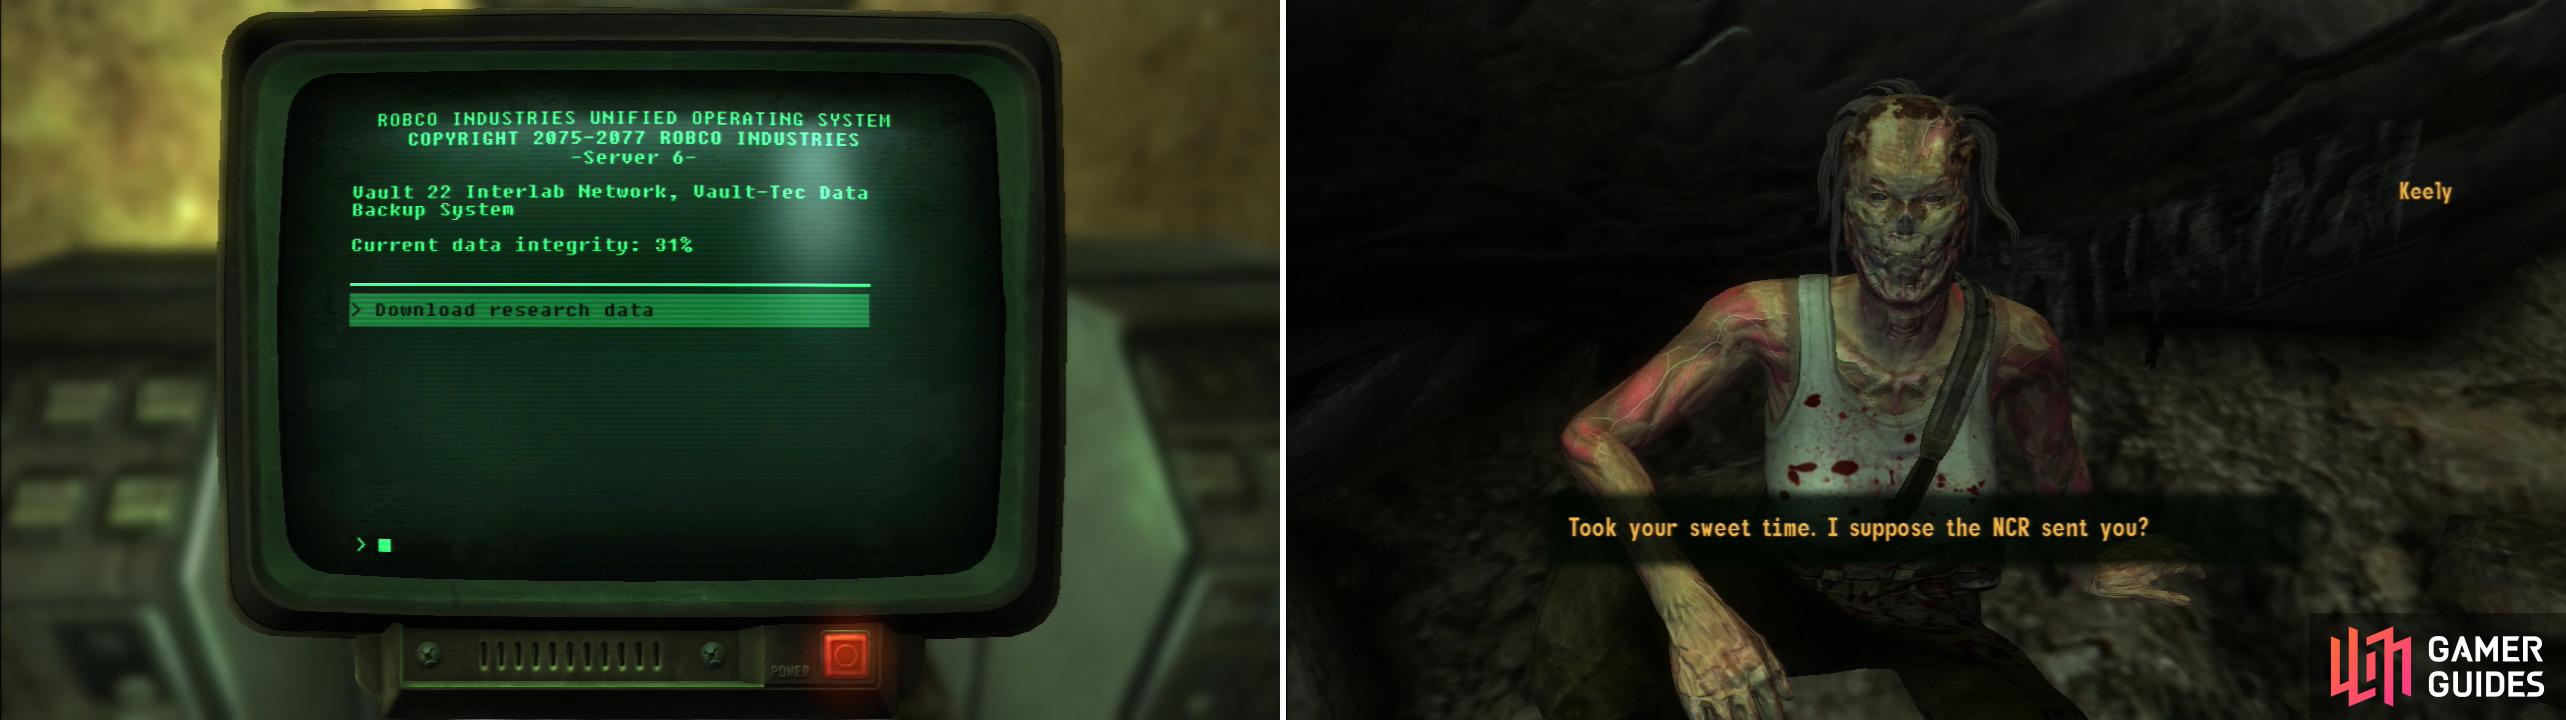 When you find the mainframe, download the data onto your Pip-Boy (left). After you clear a Spore Plant-infested cavern, you’ll find Keely (right).